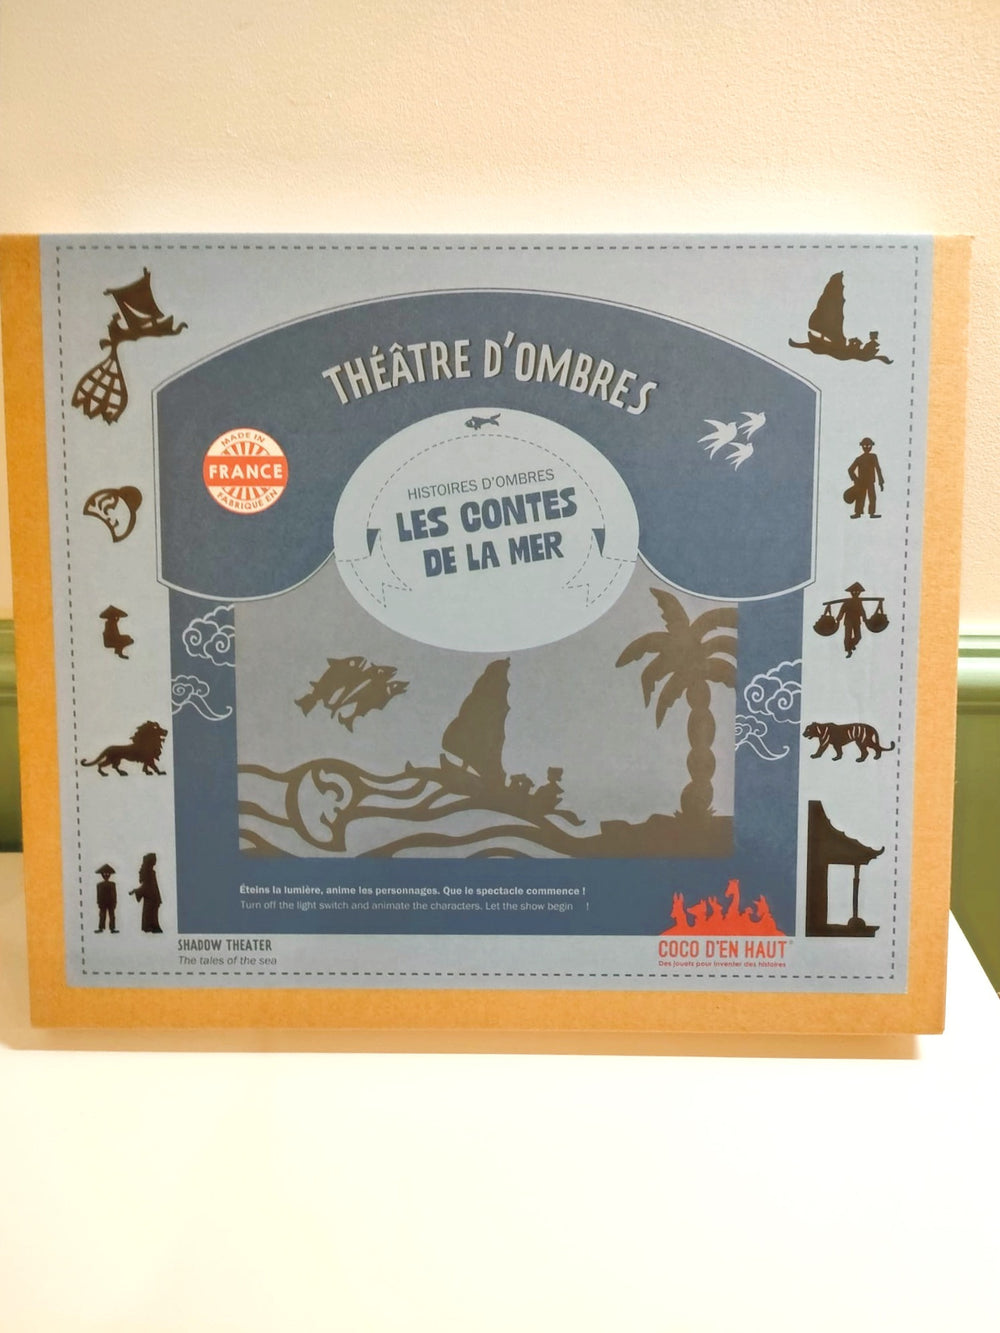 Shadow theater Tales of the sea - Made in France - Coco d'en Haut -